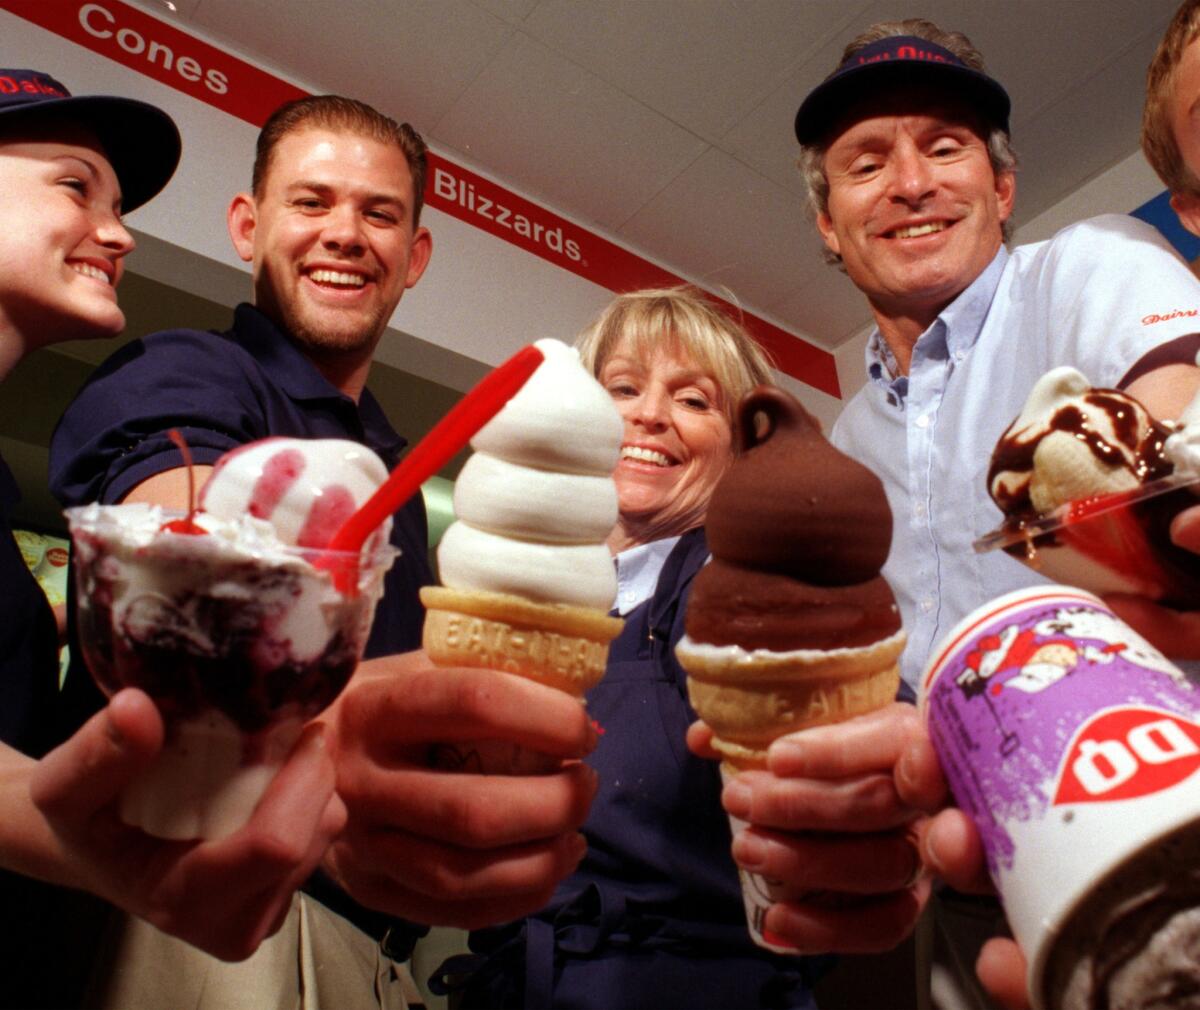 It's Free Cone Day at Dairy Queen. Pictured, from left, are Dairy Queen employees Molly Greene, Mike Hill, Kate Silverman, and her husband Rick, with various types of ice cream.